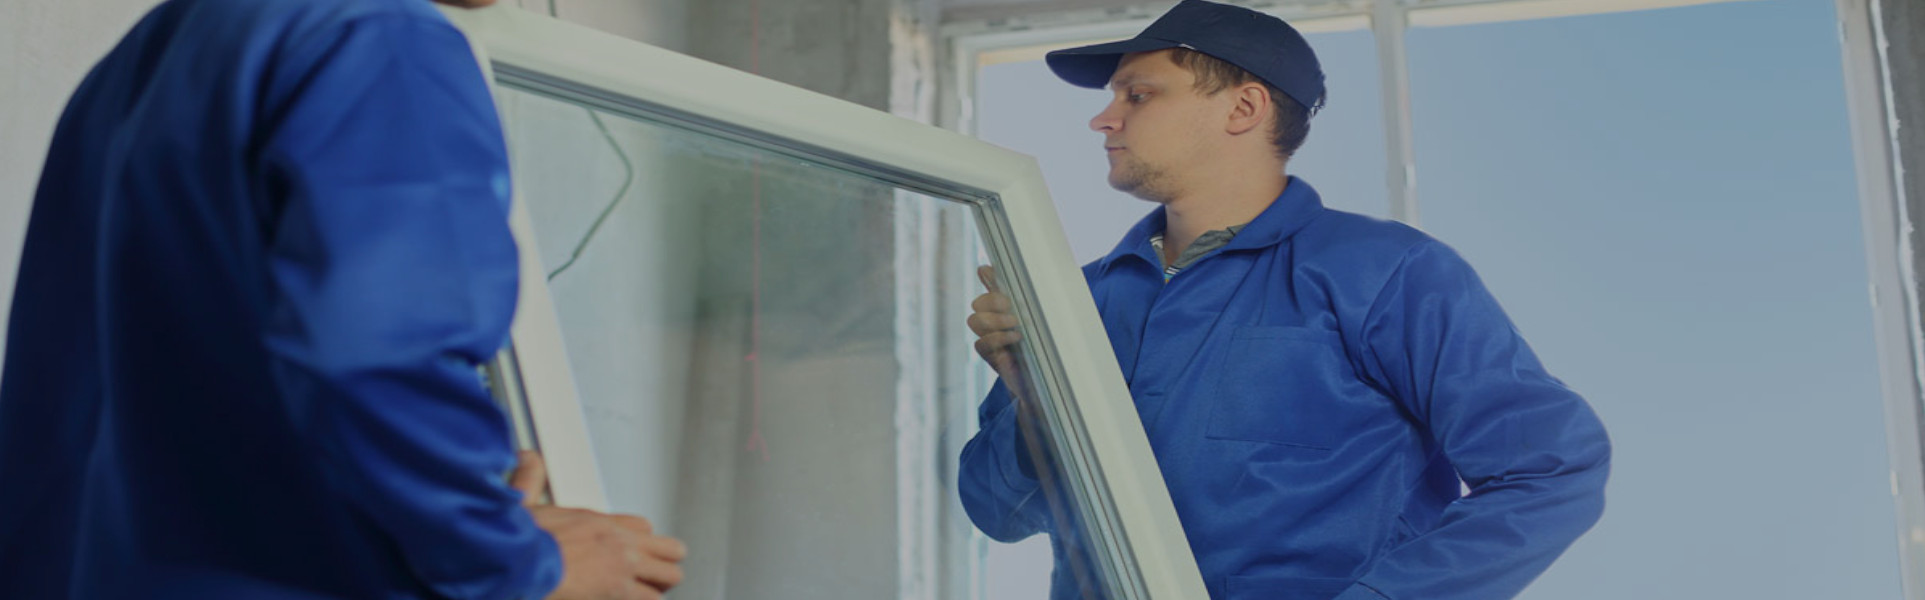 Slider, Double Glazing Installers in West Brompton, World's End, SW10